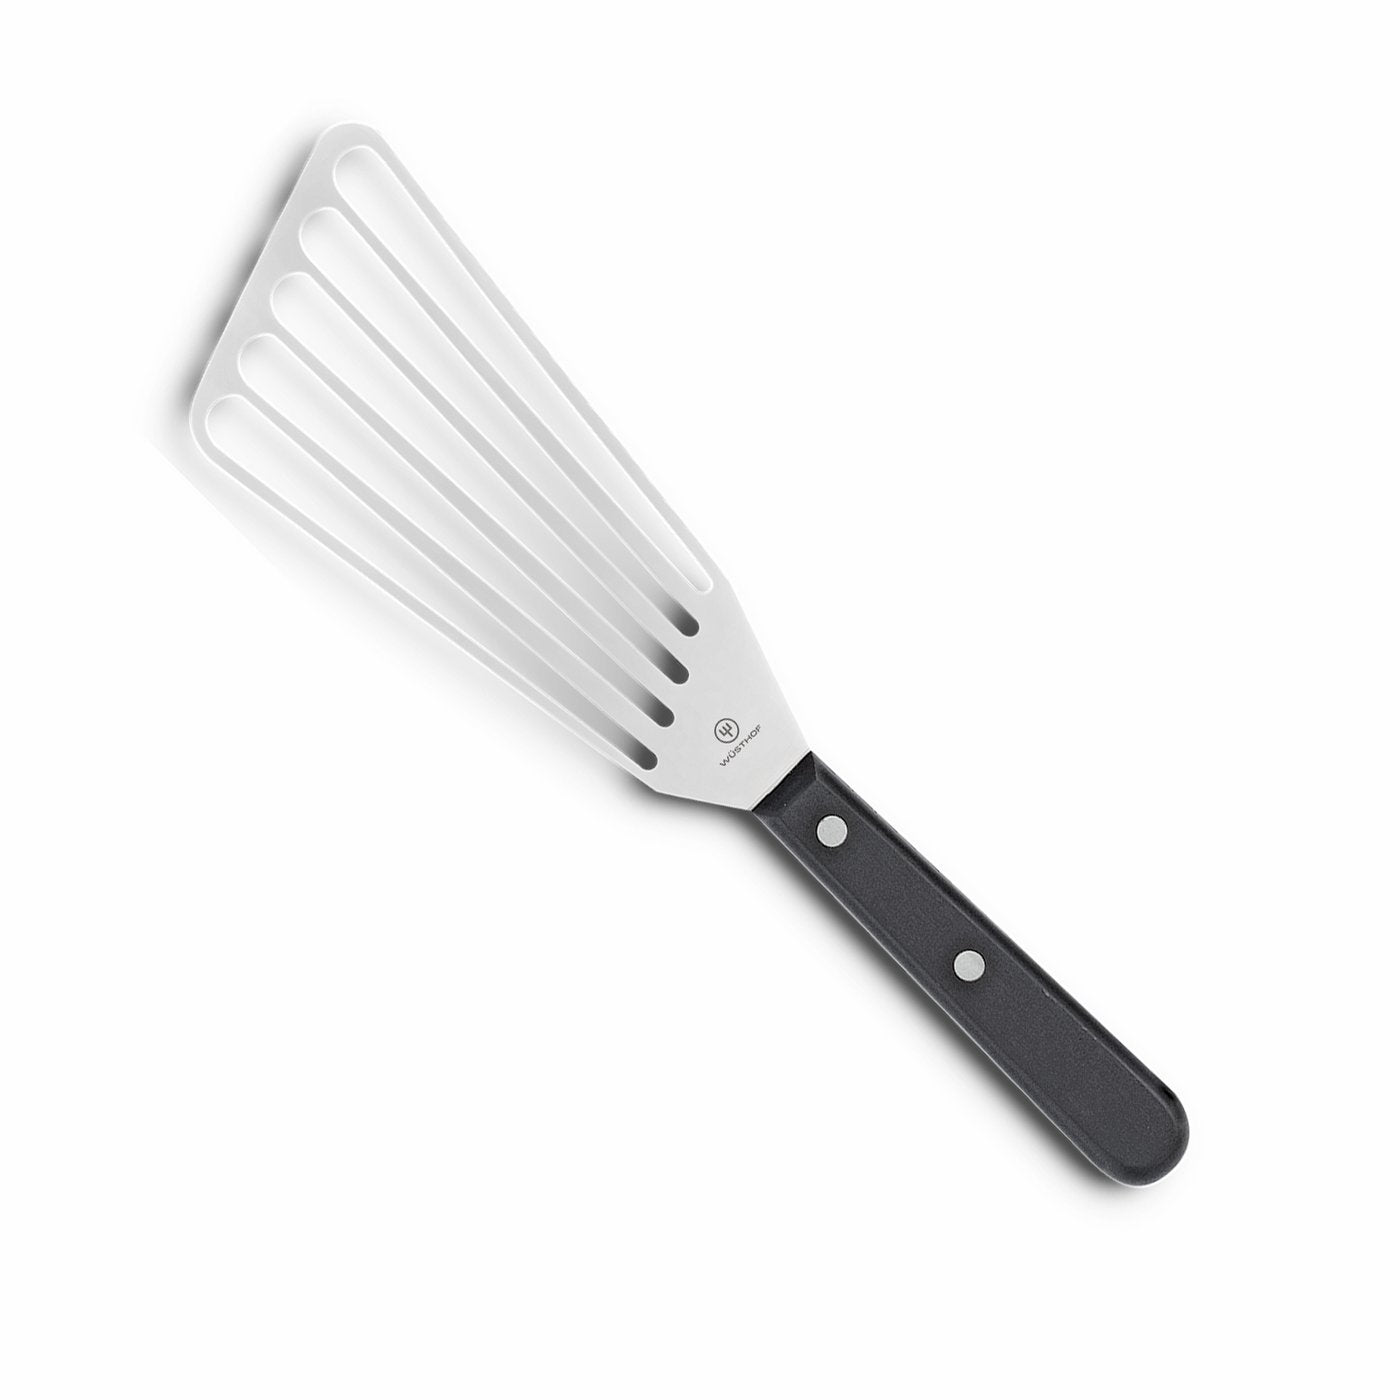 Wusthof 7-Inch Slotted Fish Spatula - Just Grillin Outdoor Living